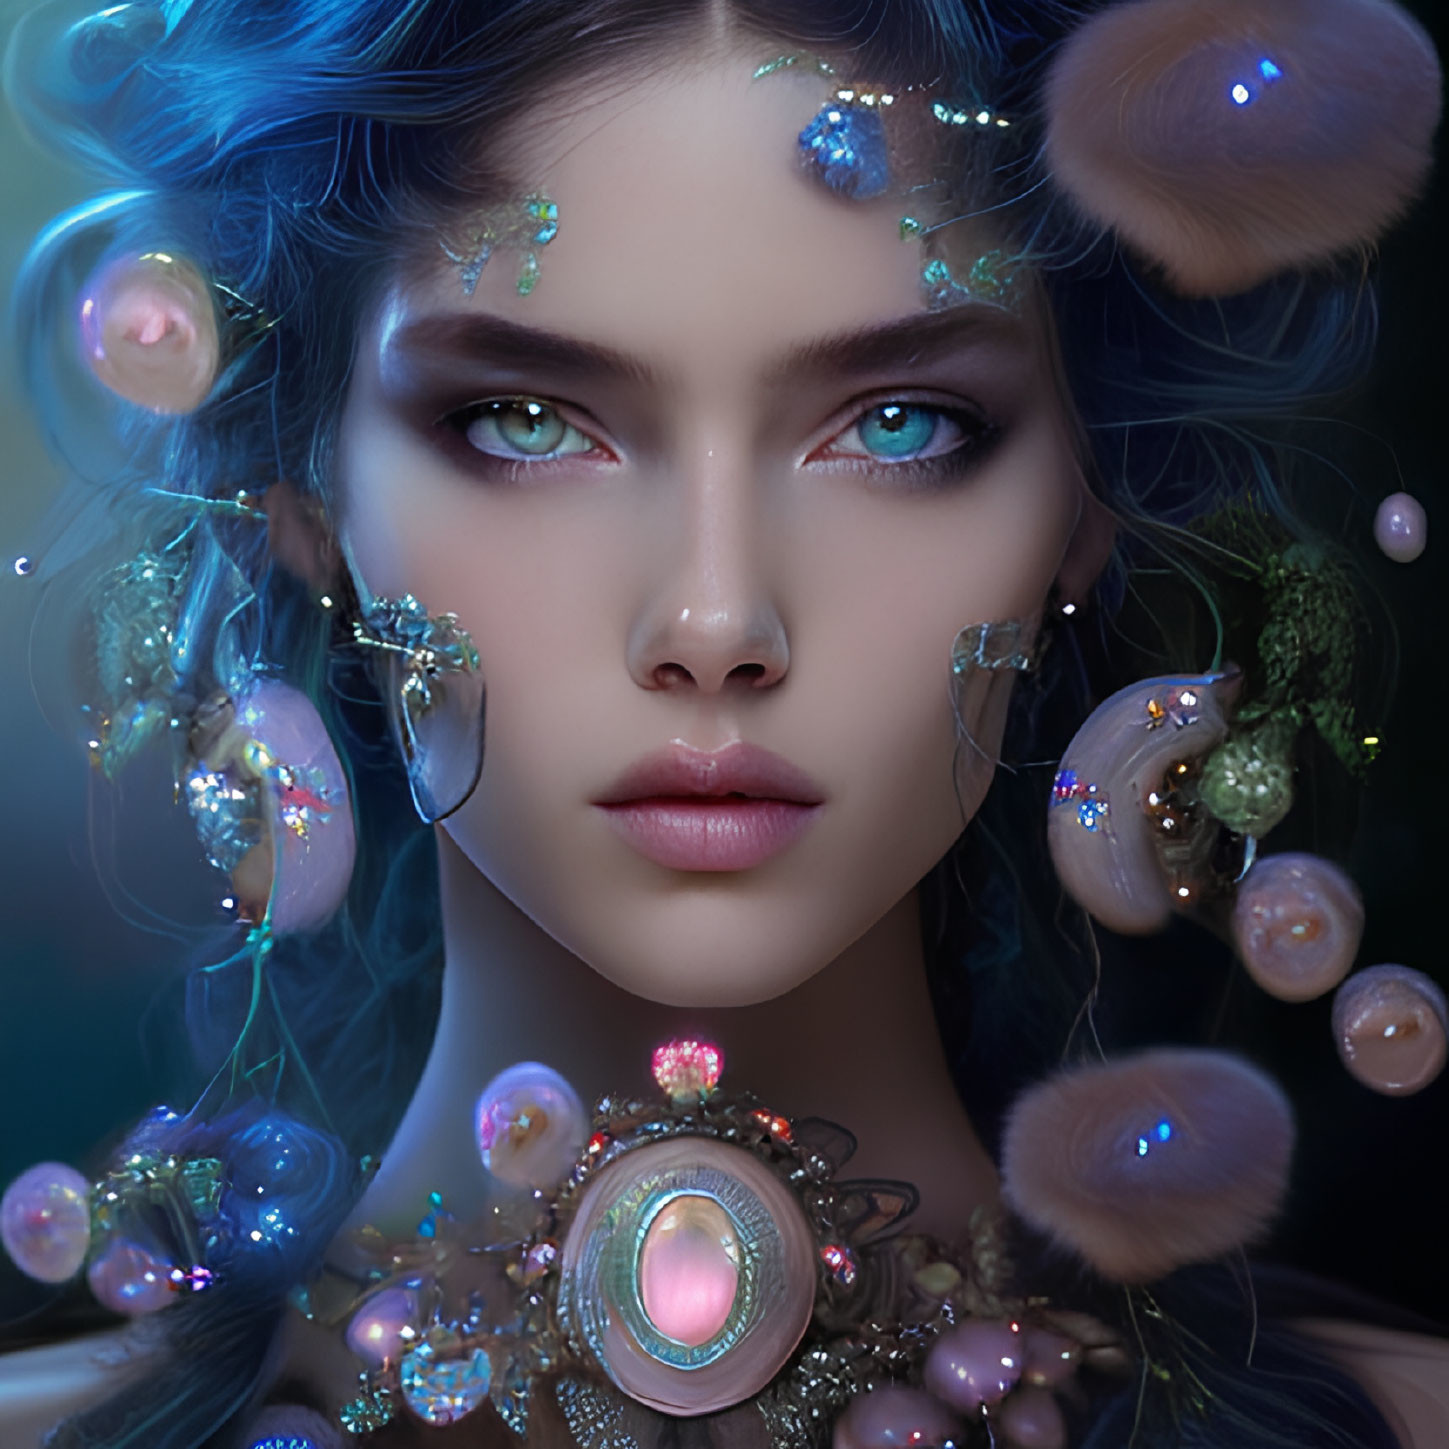 Fantasy portrait of a woman with blue eyes and glowing jewelry surrounded by whimsical flora.